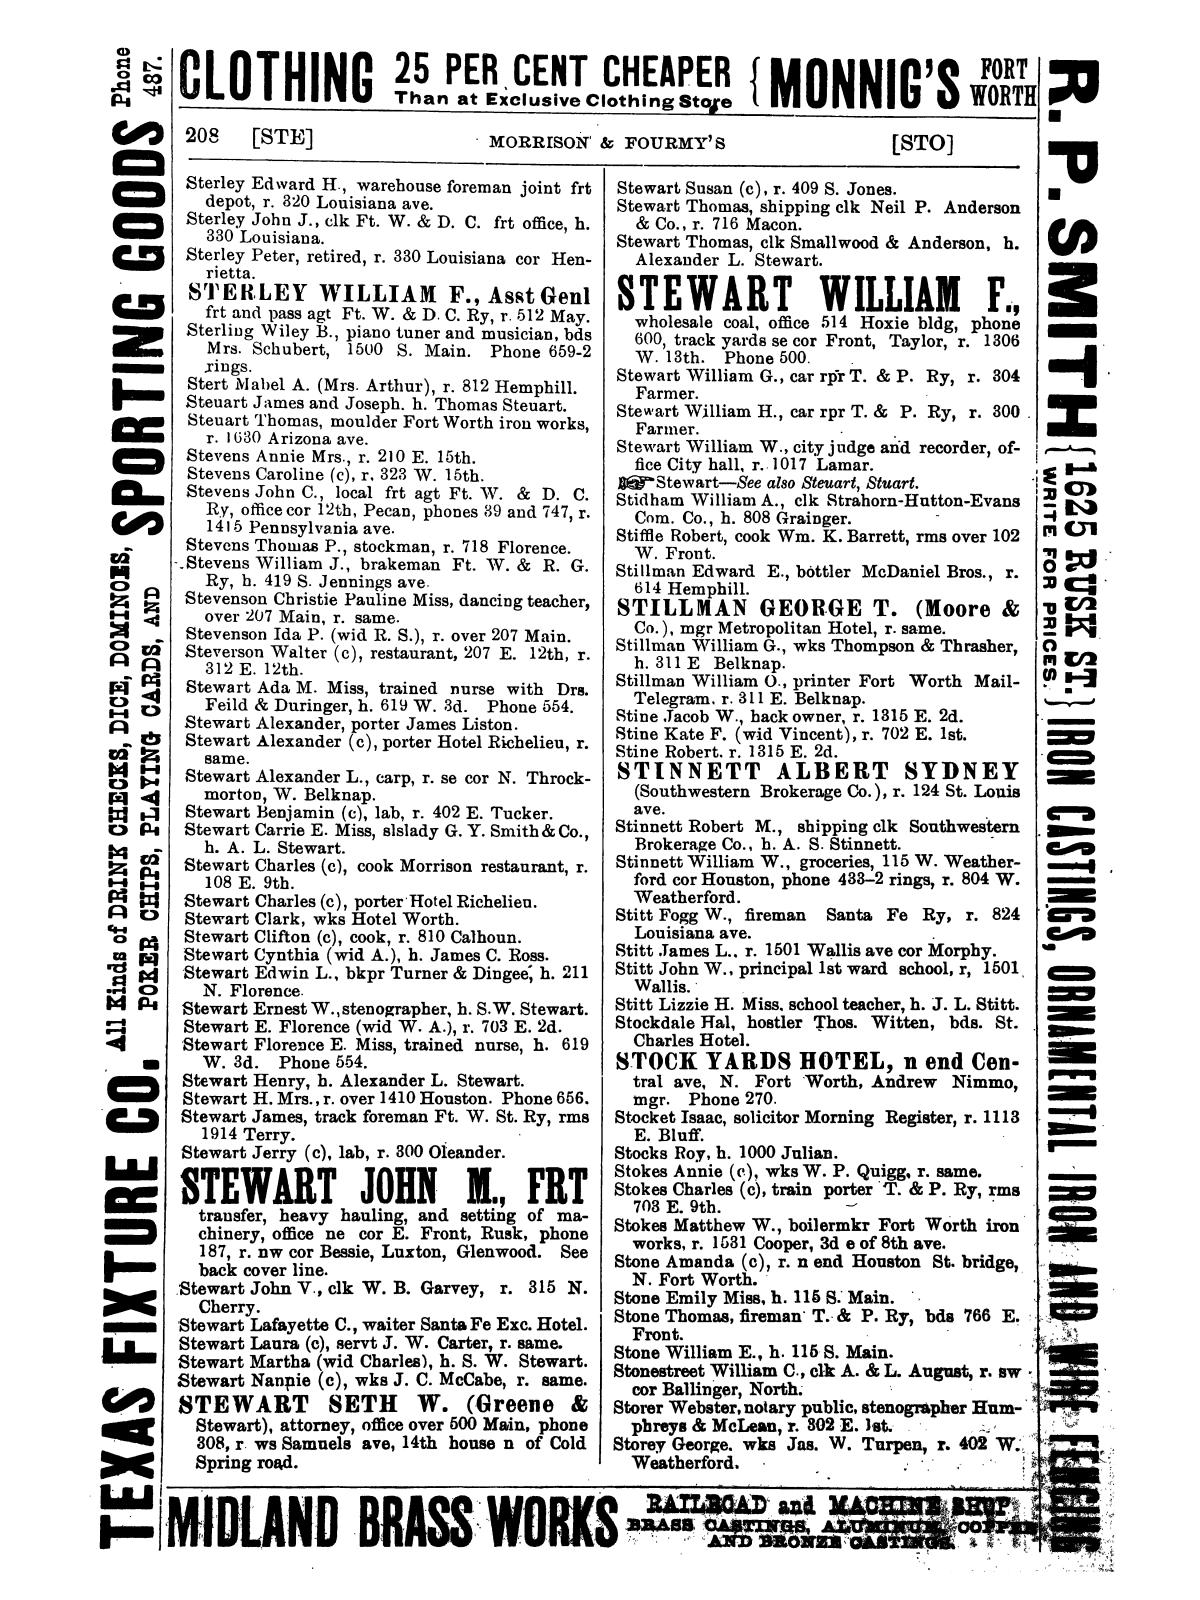 Morrison & Fourmy's General Directory of the City of Fort Worth 1899-1900.
                                                
                                                    208
                                                